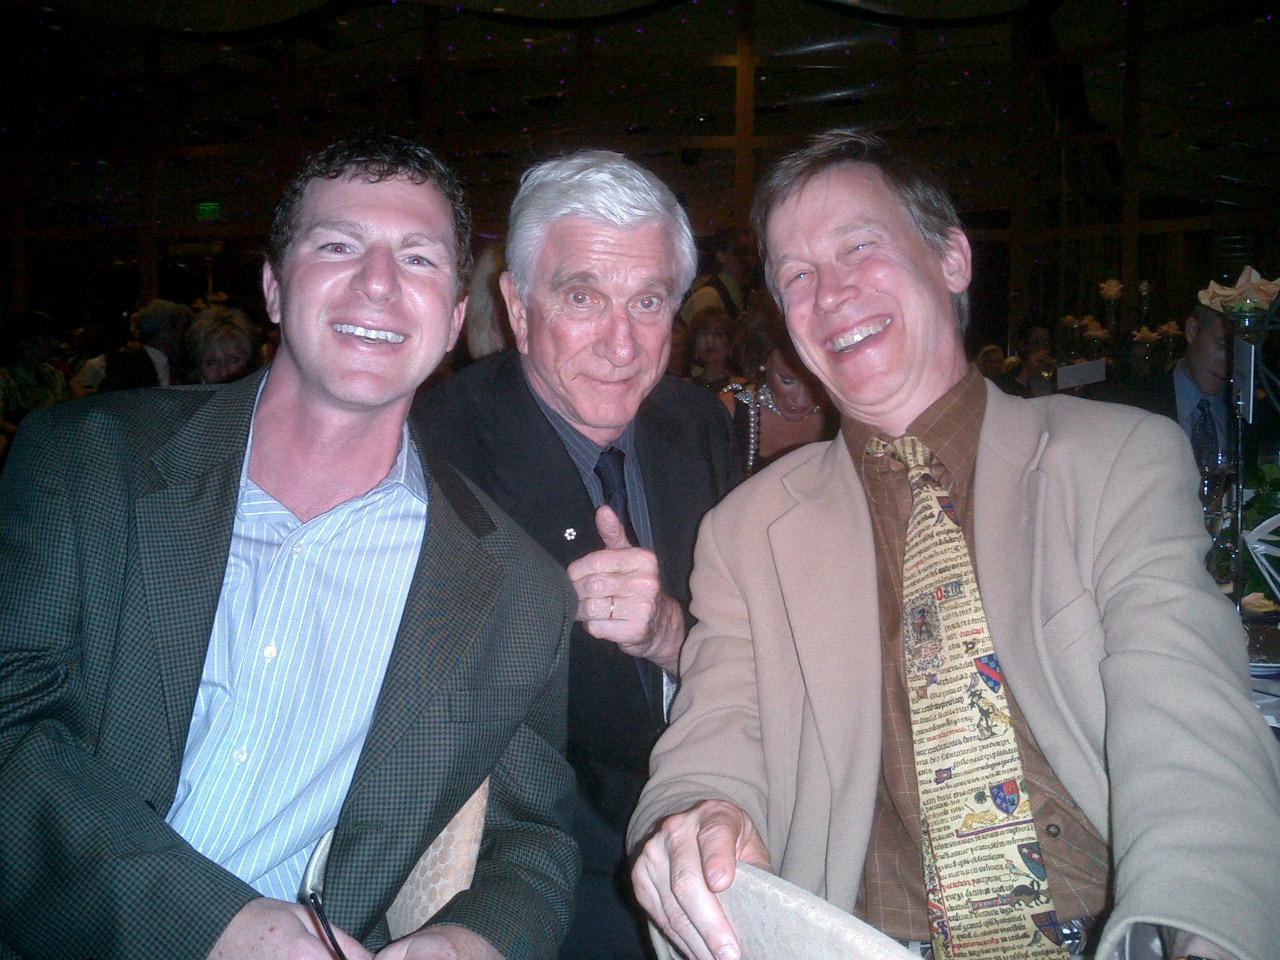 Peter Greenwald, Leslie Nielson and Colorado Governor John Hickenlooper